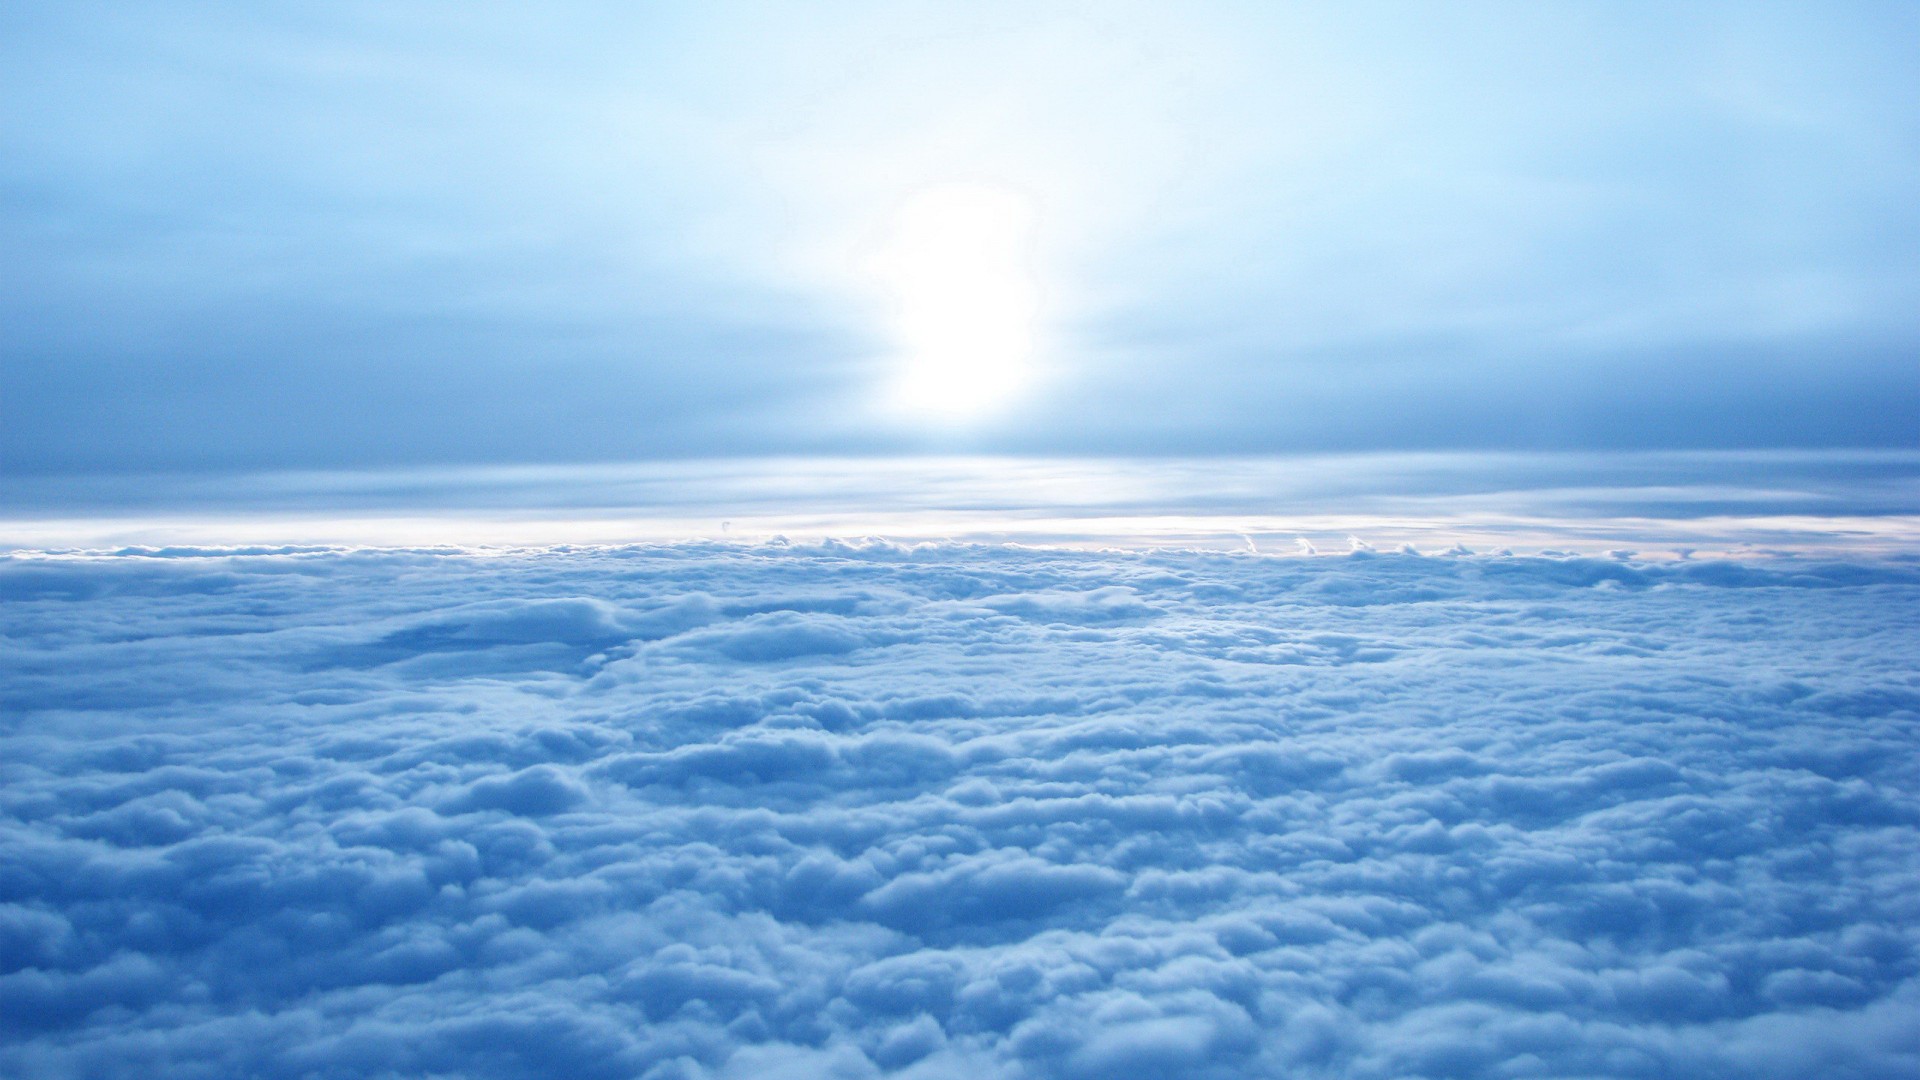 File:Over the clouds.jpg - Wikimedia Commons